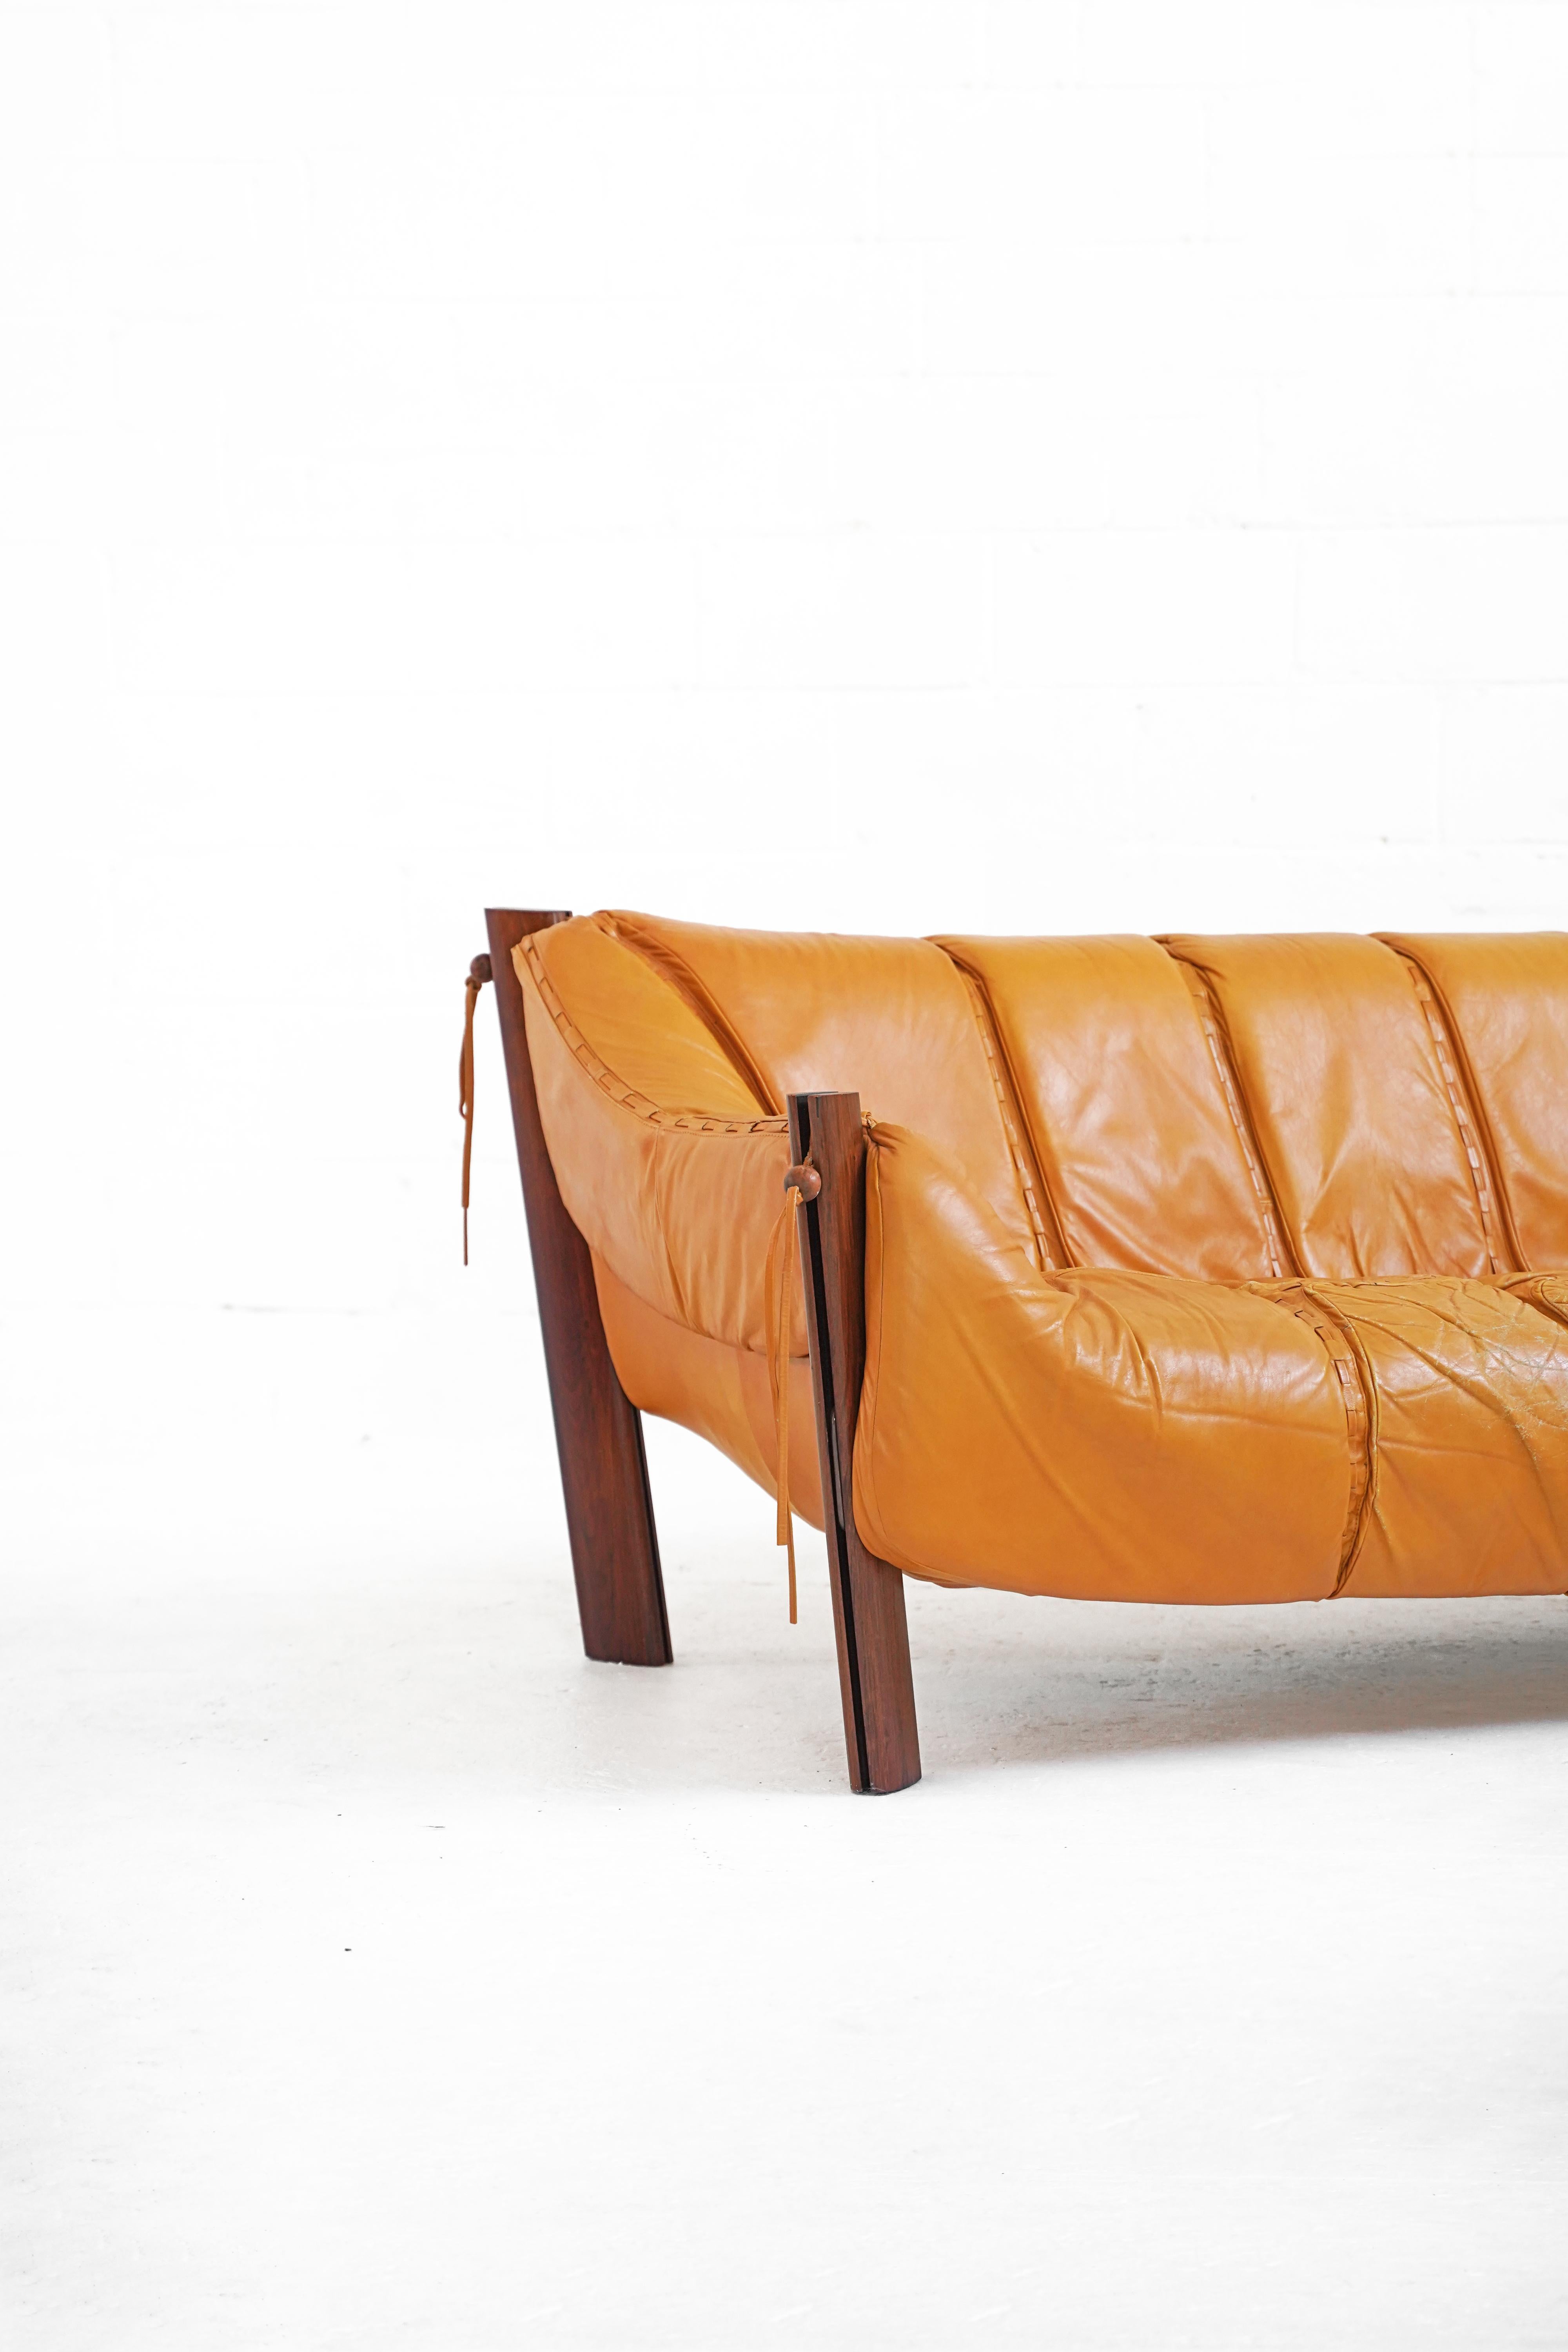 1960-1979 Production. Original leather upholstery in a Tuscany Yellow, with some patina, as photographed. Both the MP-211 sofa and matching lounge chair date to the 60s-70s.

Measurements: 
Sofa: 78